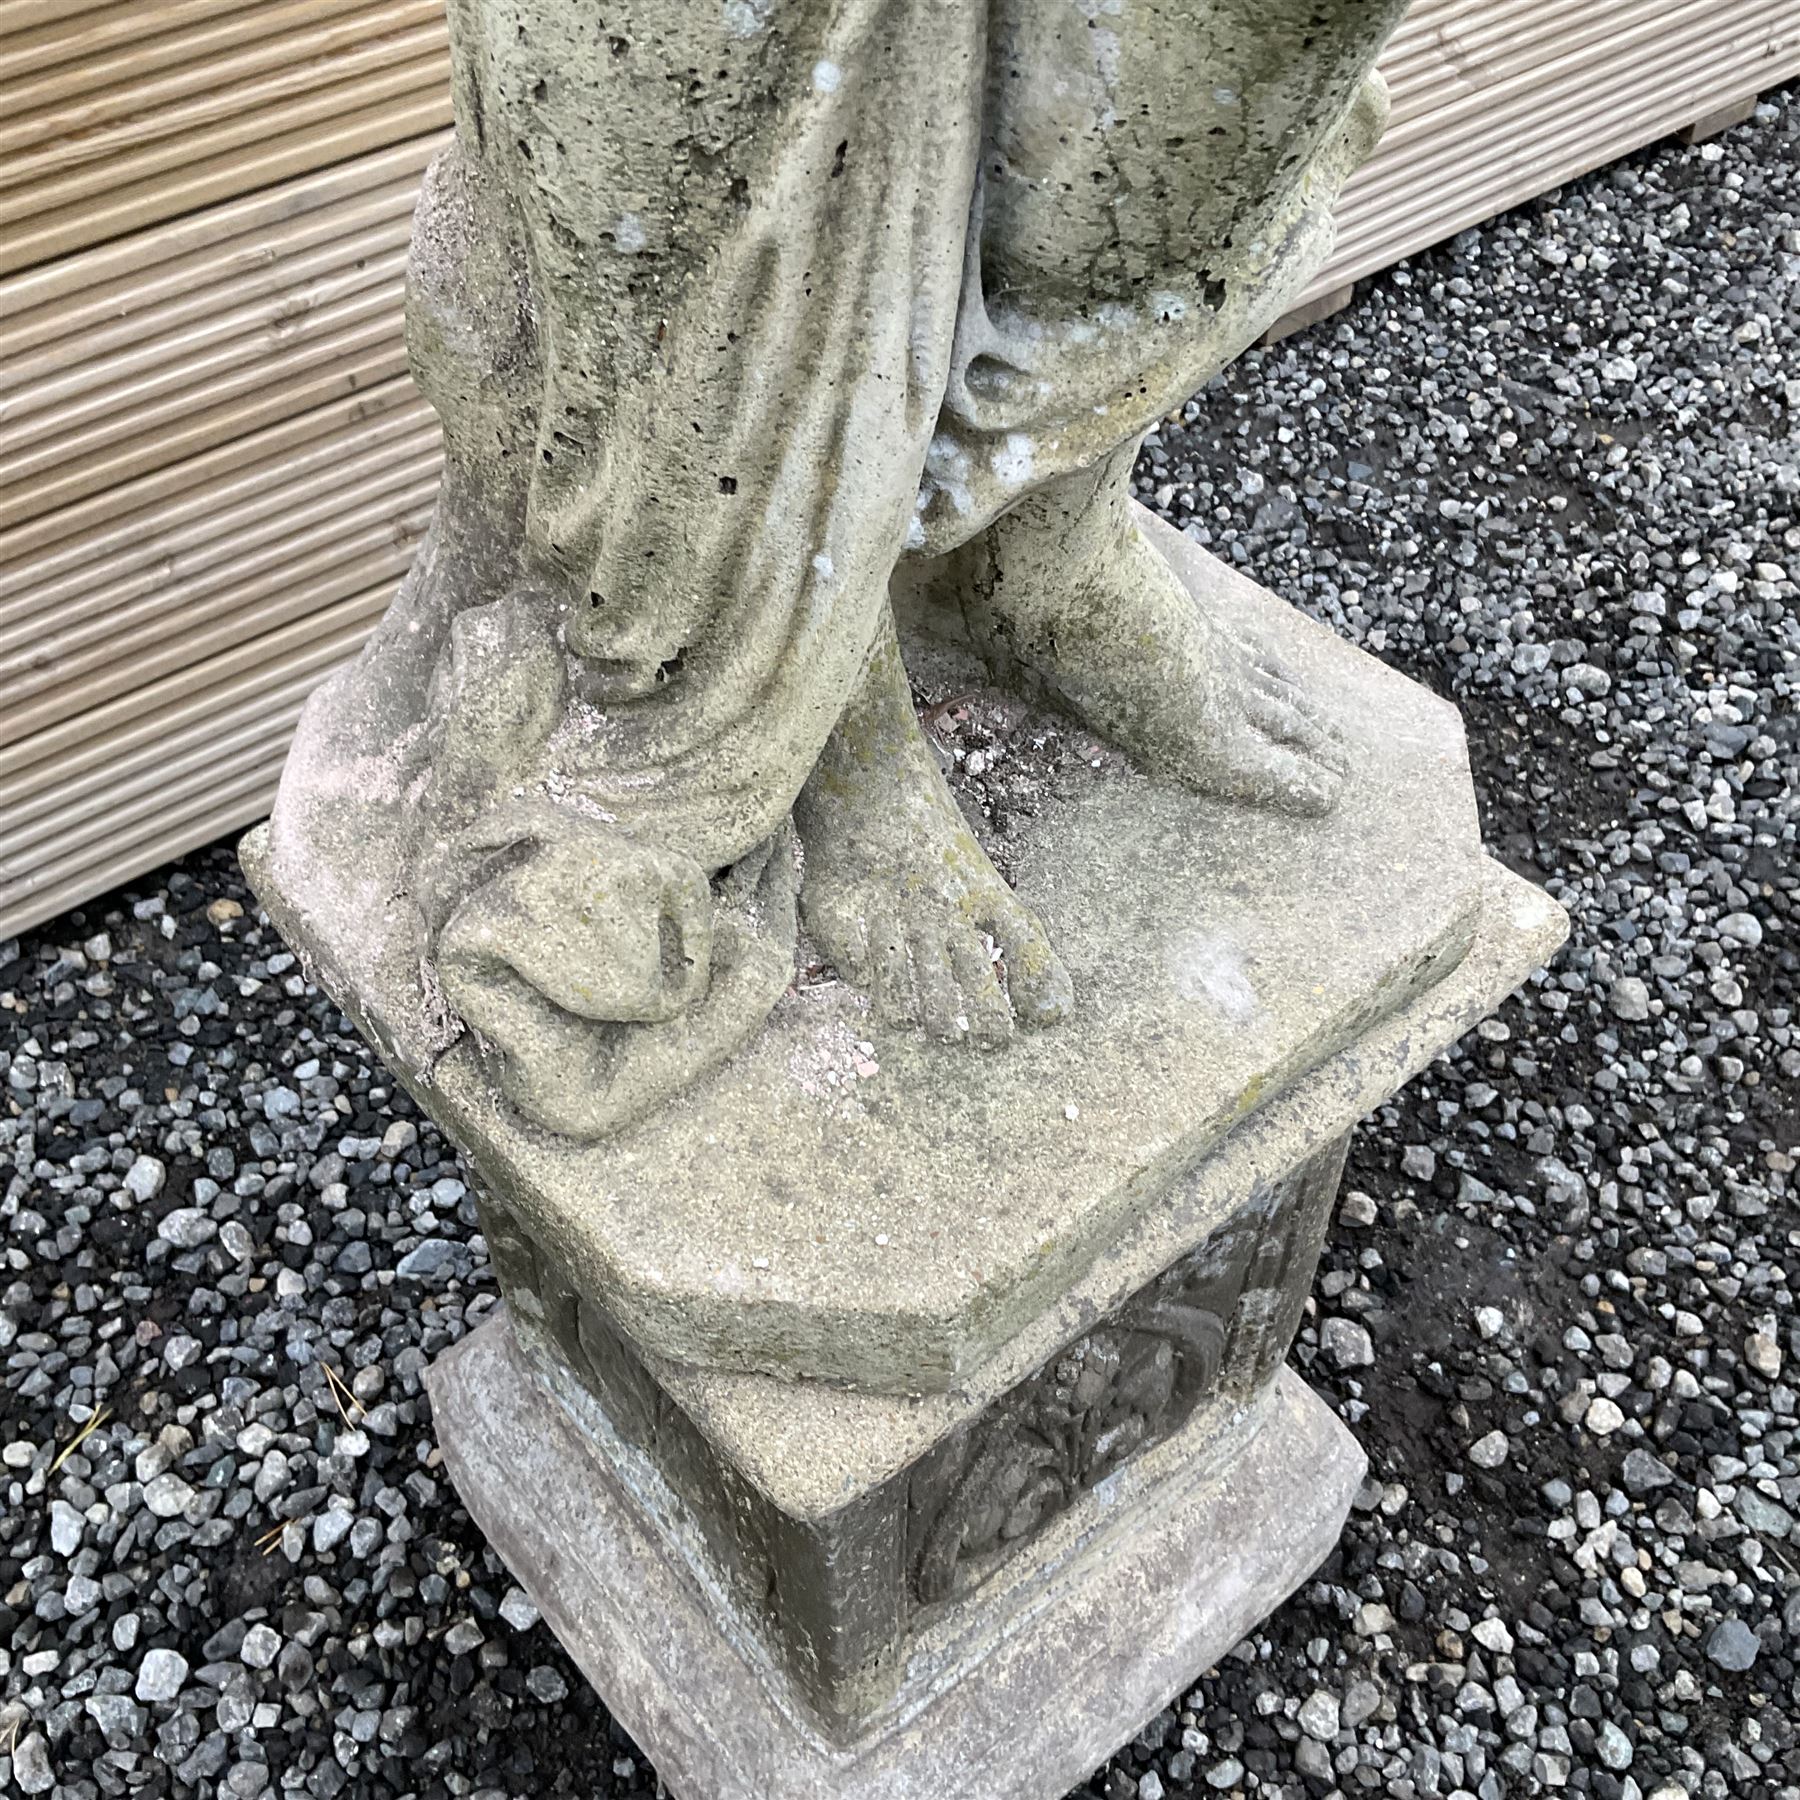 Cast stone garden figure of a woman with arms raised - Image 5 of 5